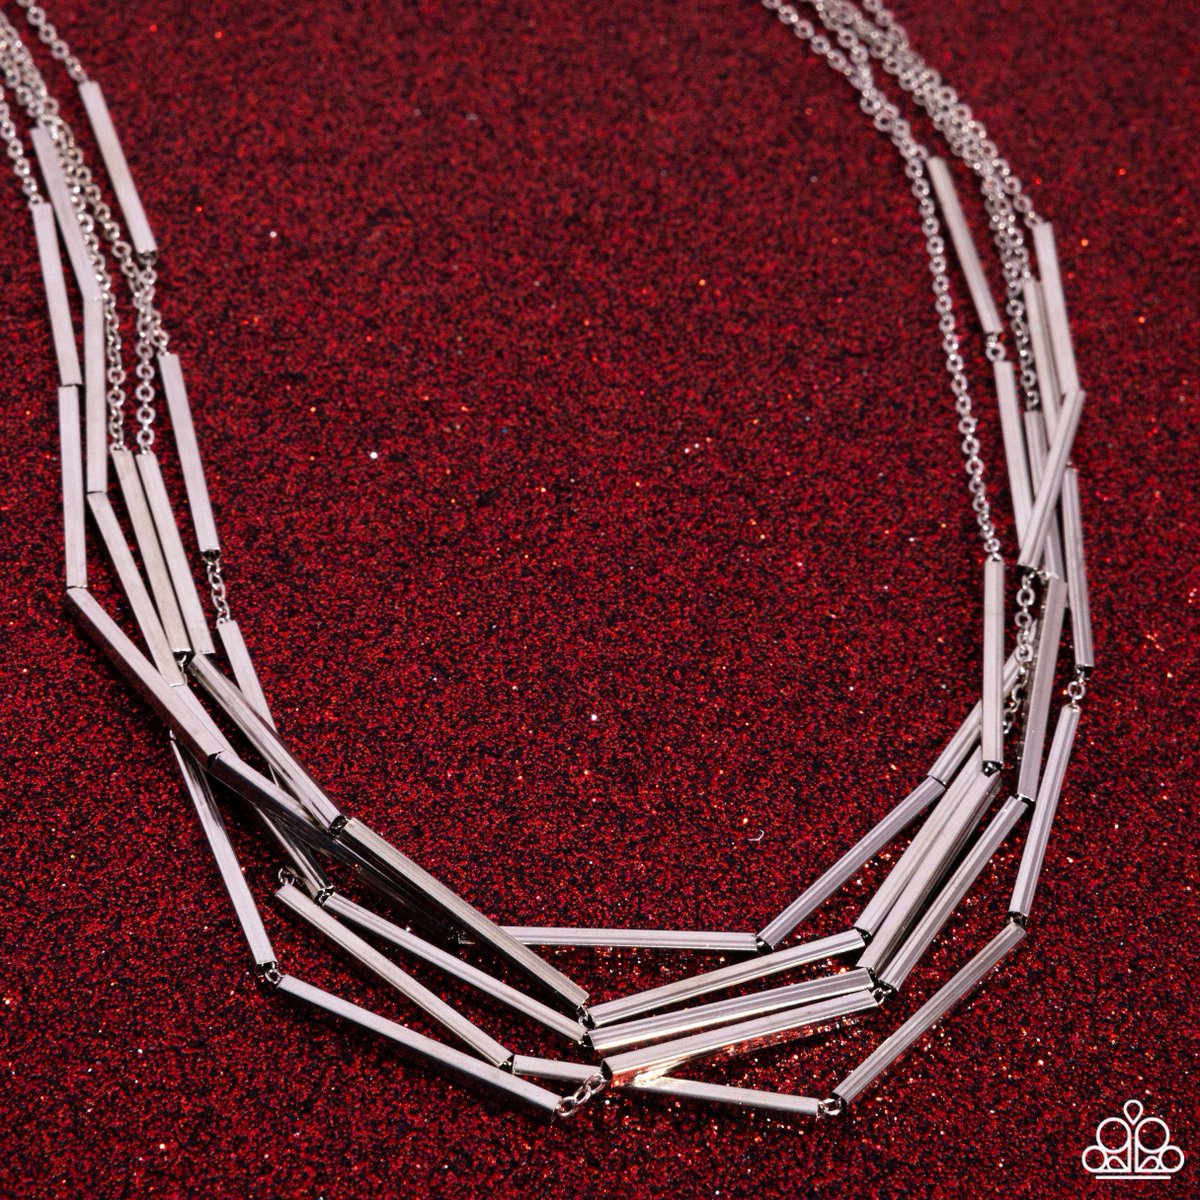 SNEAK PEEK: When in doubt, layer on the silver! This necklace is the ultimate accessory for adding some fun, sleek attitude to your look. 
#Silver #Necklaceoftheday #Bold